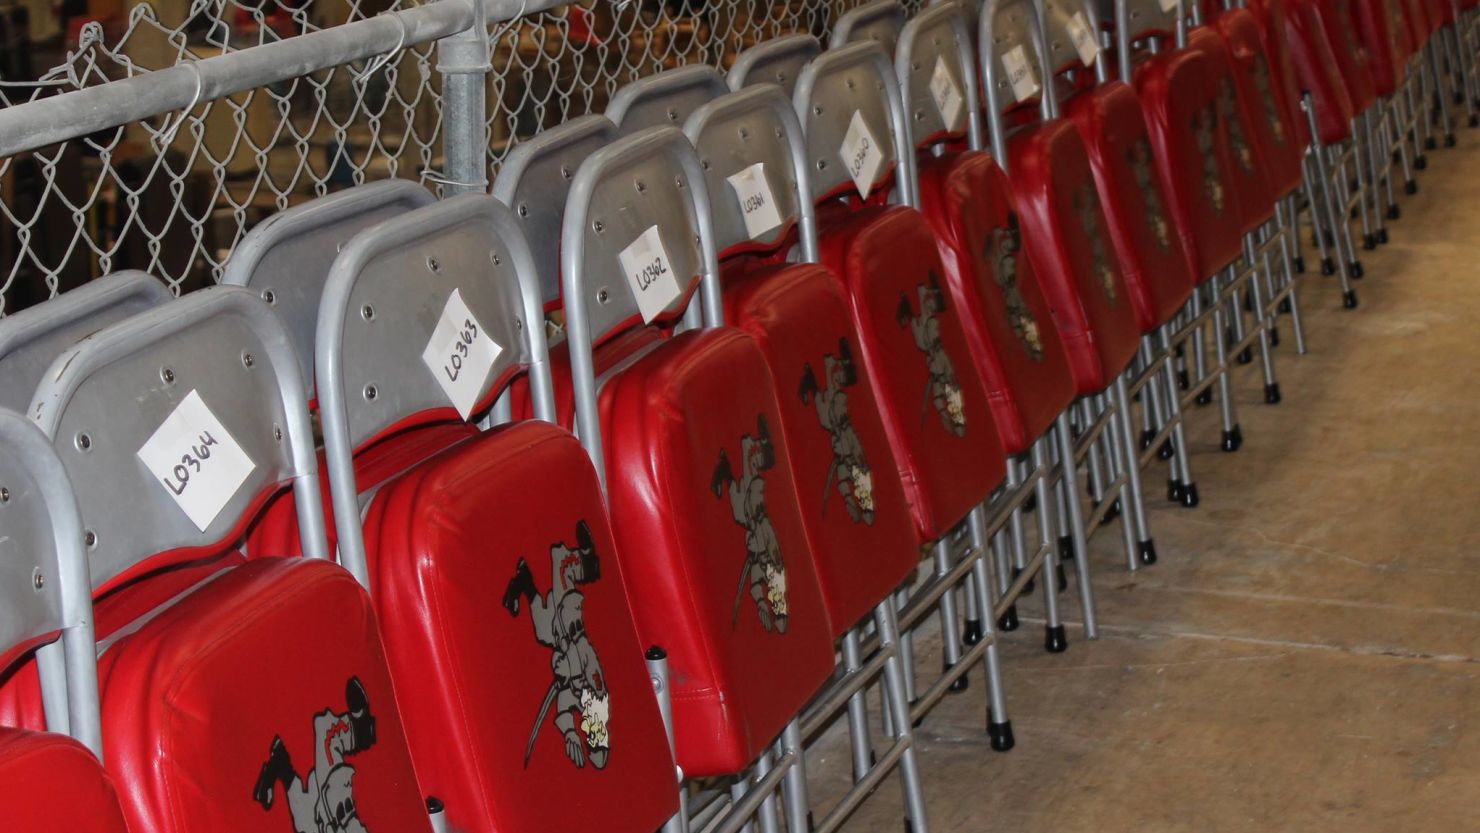 Memorabilia such these chairs are among the items a San Antonio school will offer up for auction.